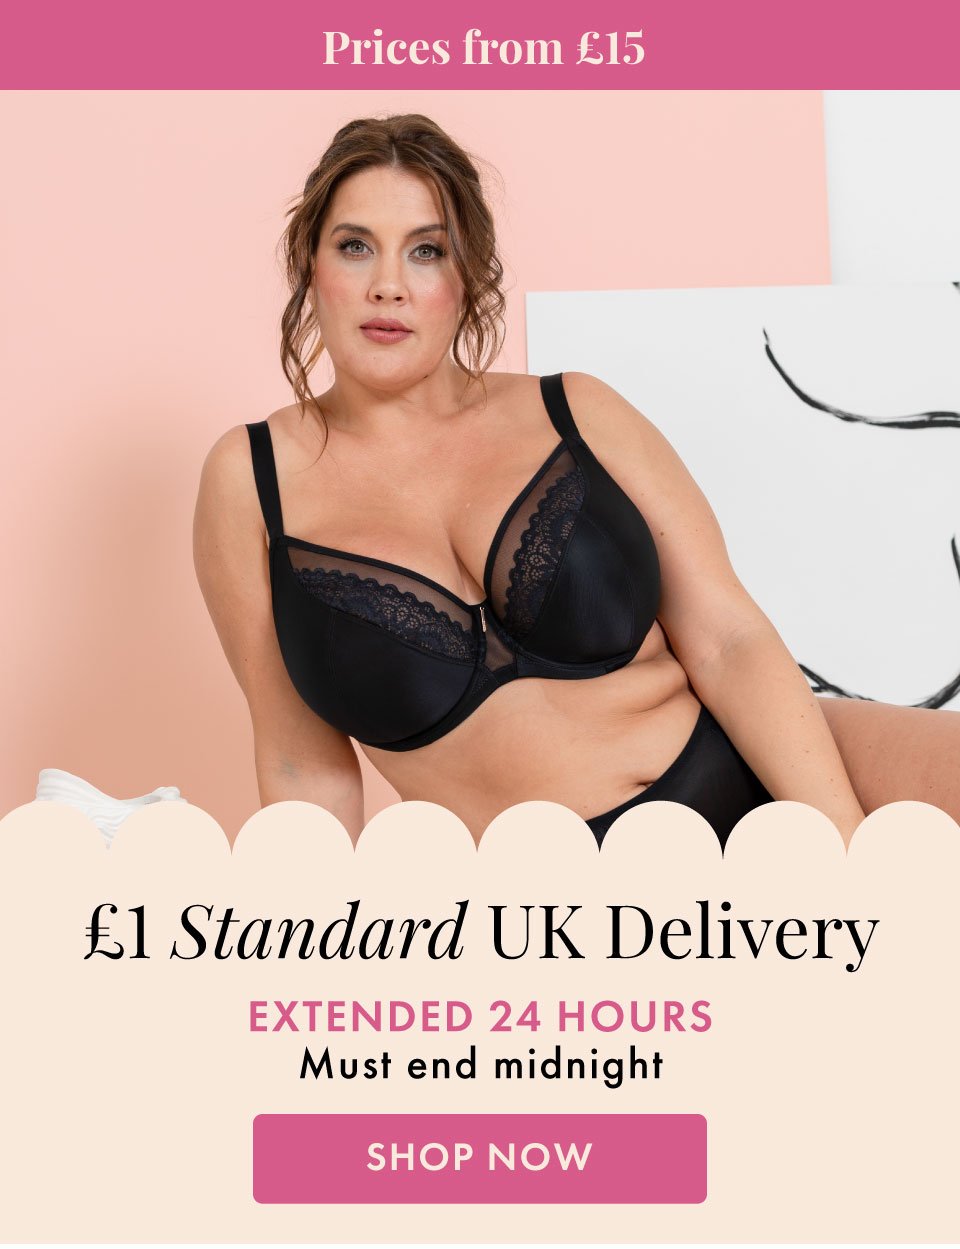 £1 Delivery | Extended 24 Hours, ends midnight tonight. Prices from £15